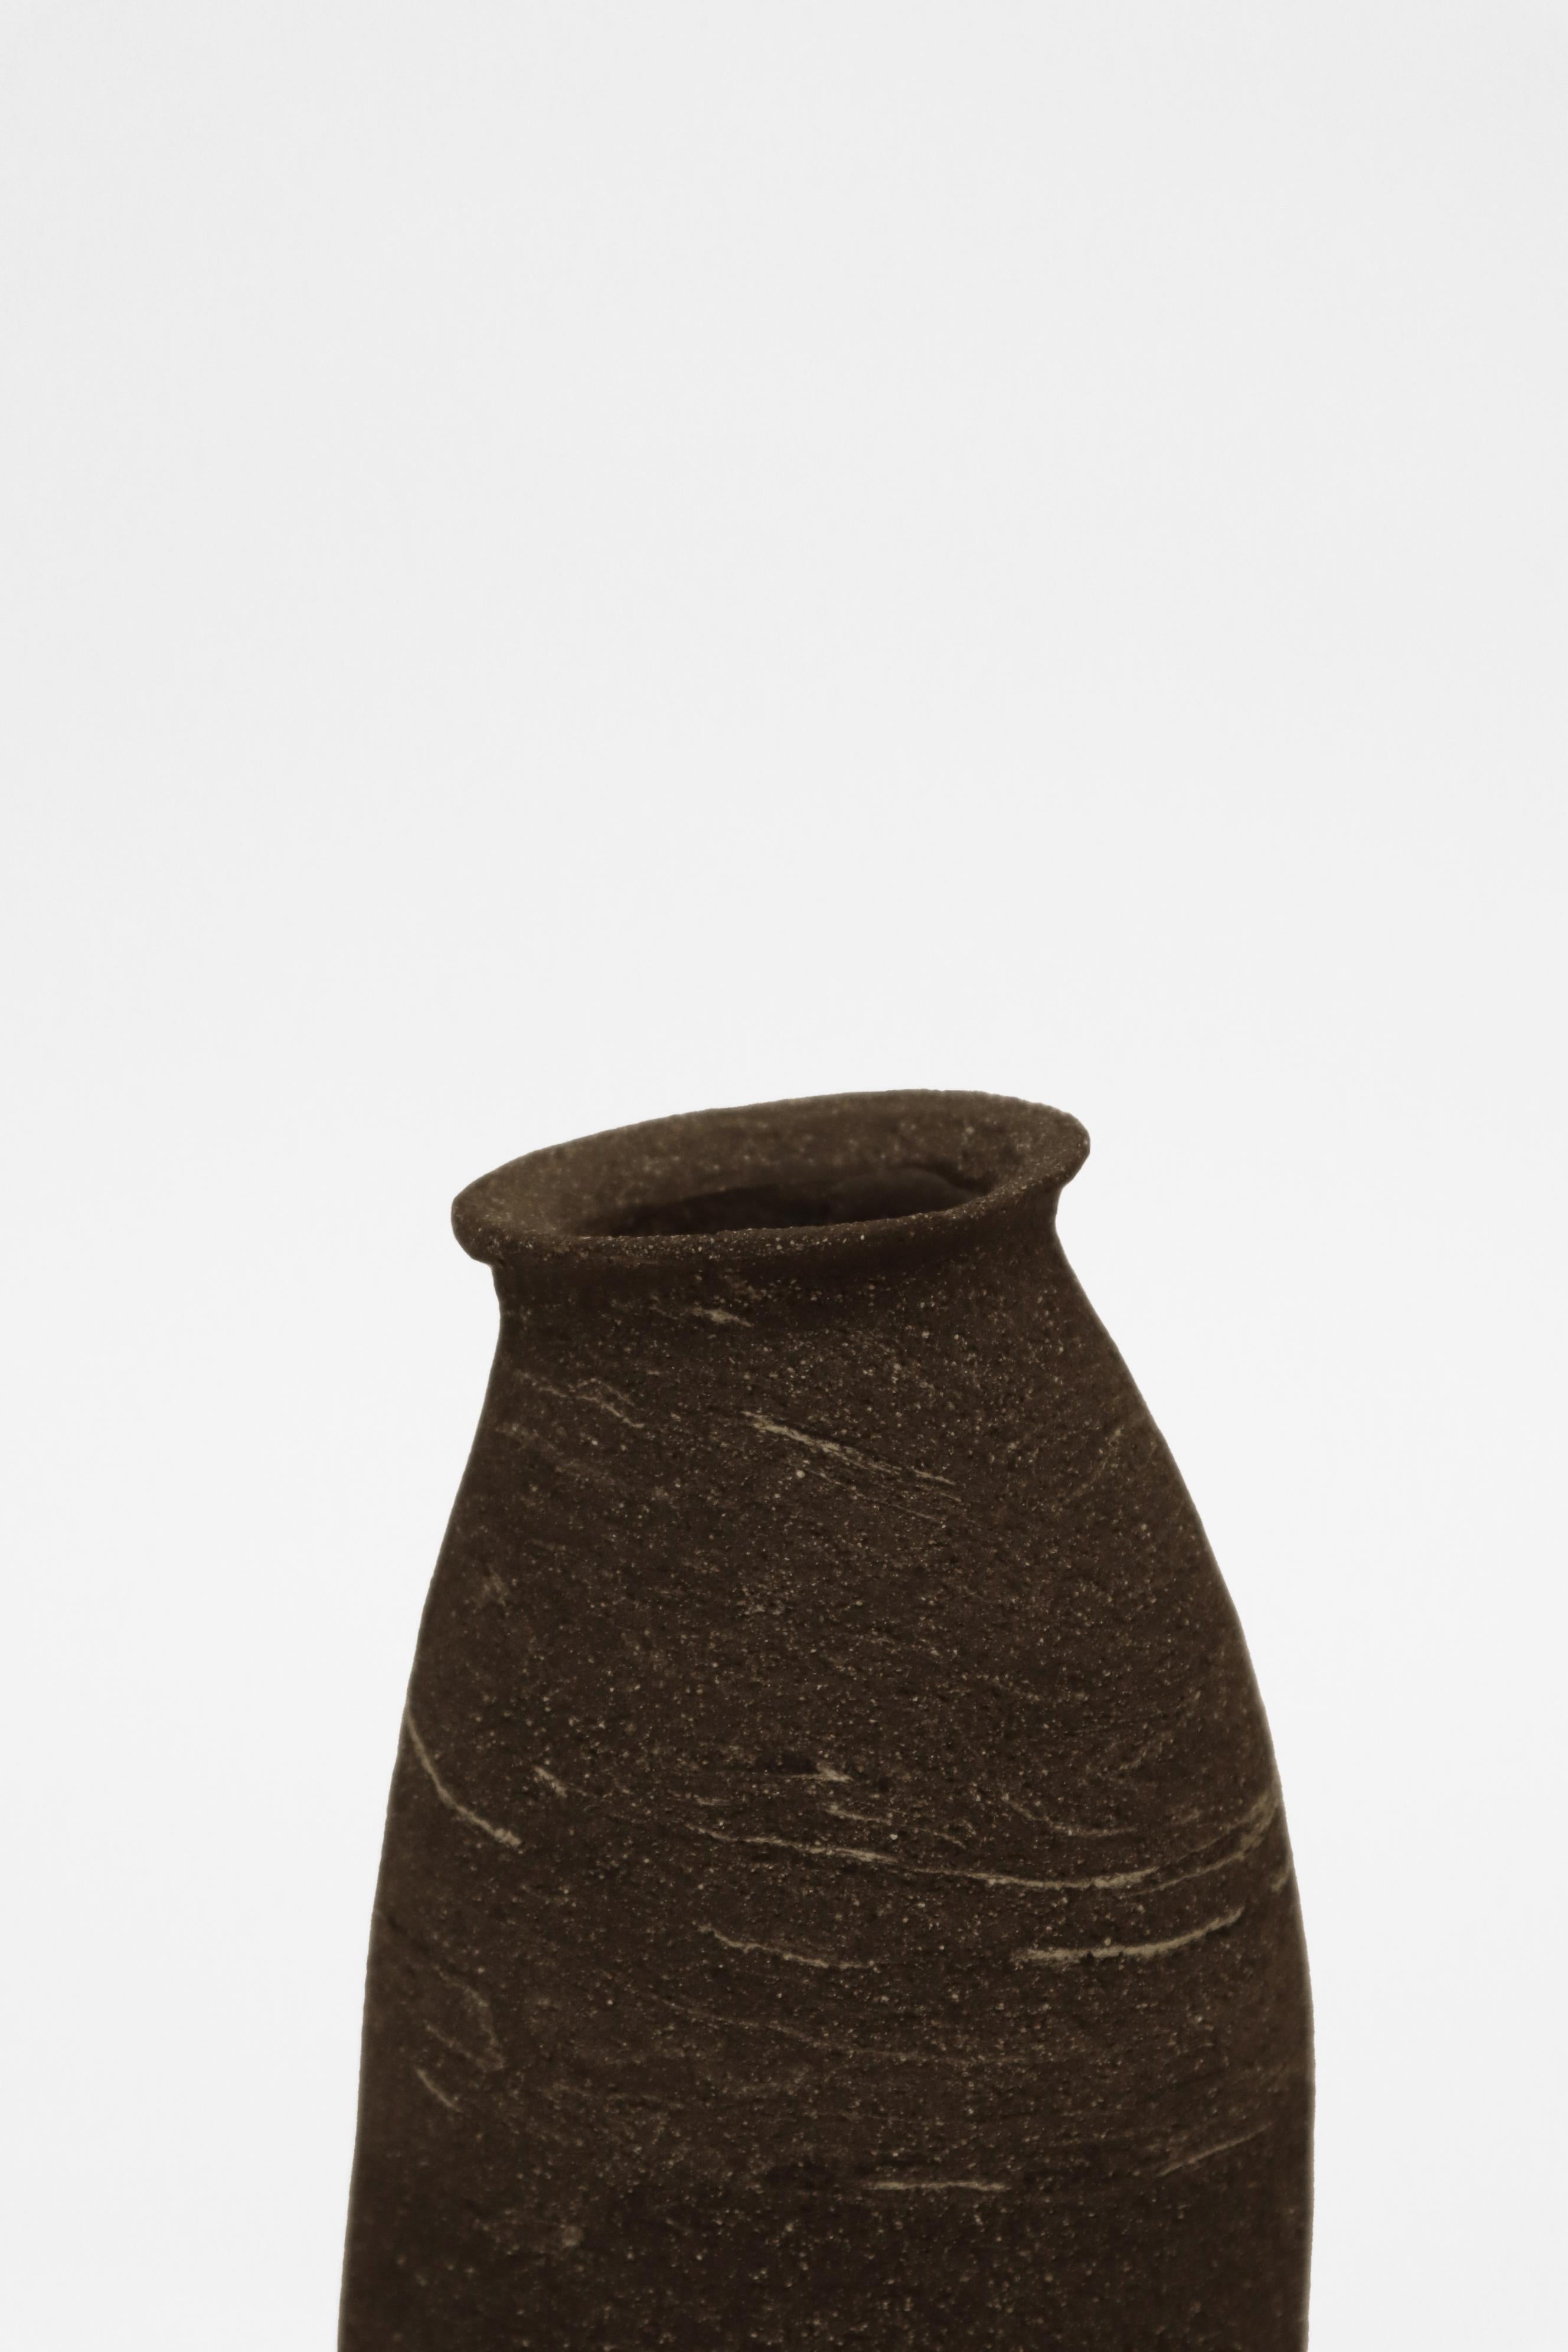 Stomata 7 vase by Anna Karountzou
Dimensions: D 9 x H 31 cm
Materials: mixed black and white stoneware clay, clear glaze inside, fired at 1240

Born and based in Athens, Greece, with a background in conservation of works of art and antiquities,